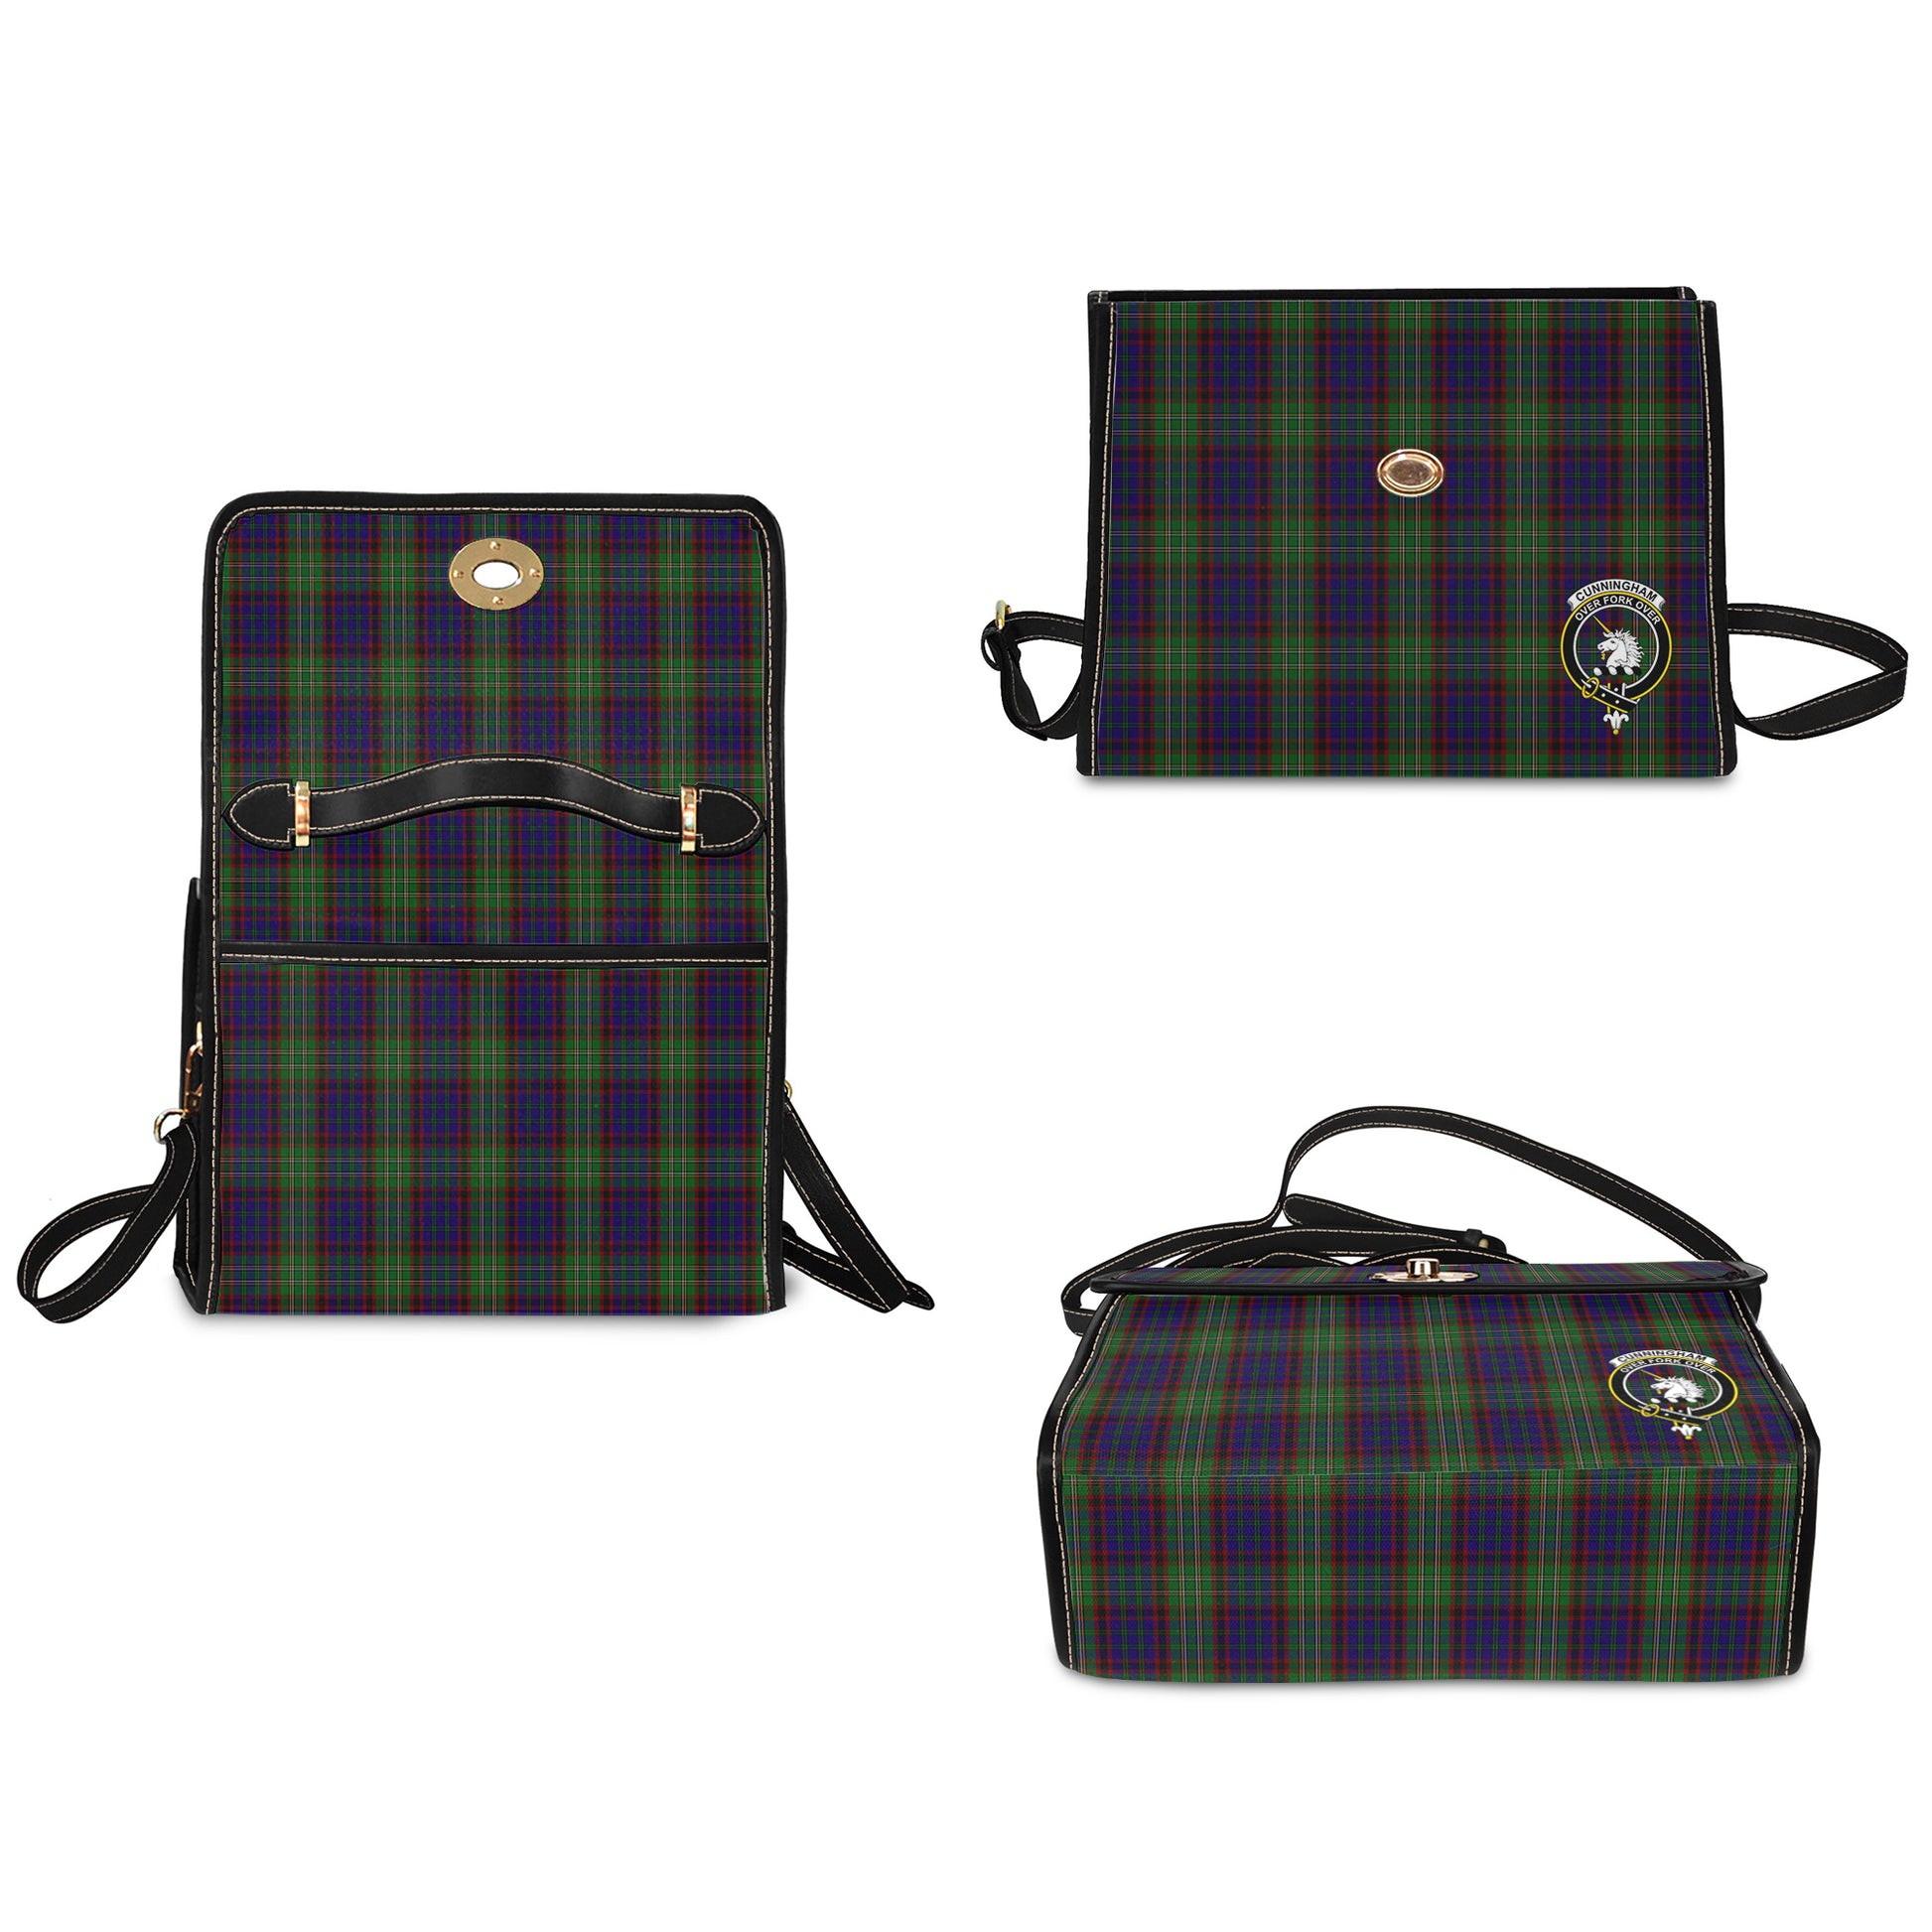 cunningham-hunting-tartan-leather-strap-waterproof-canvas-bag-with-family-crest